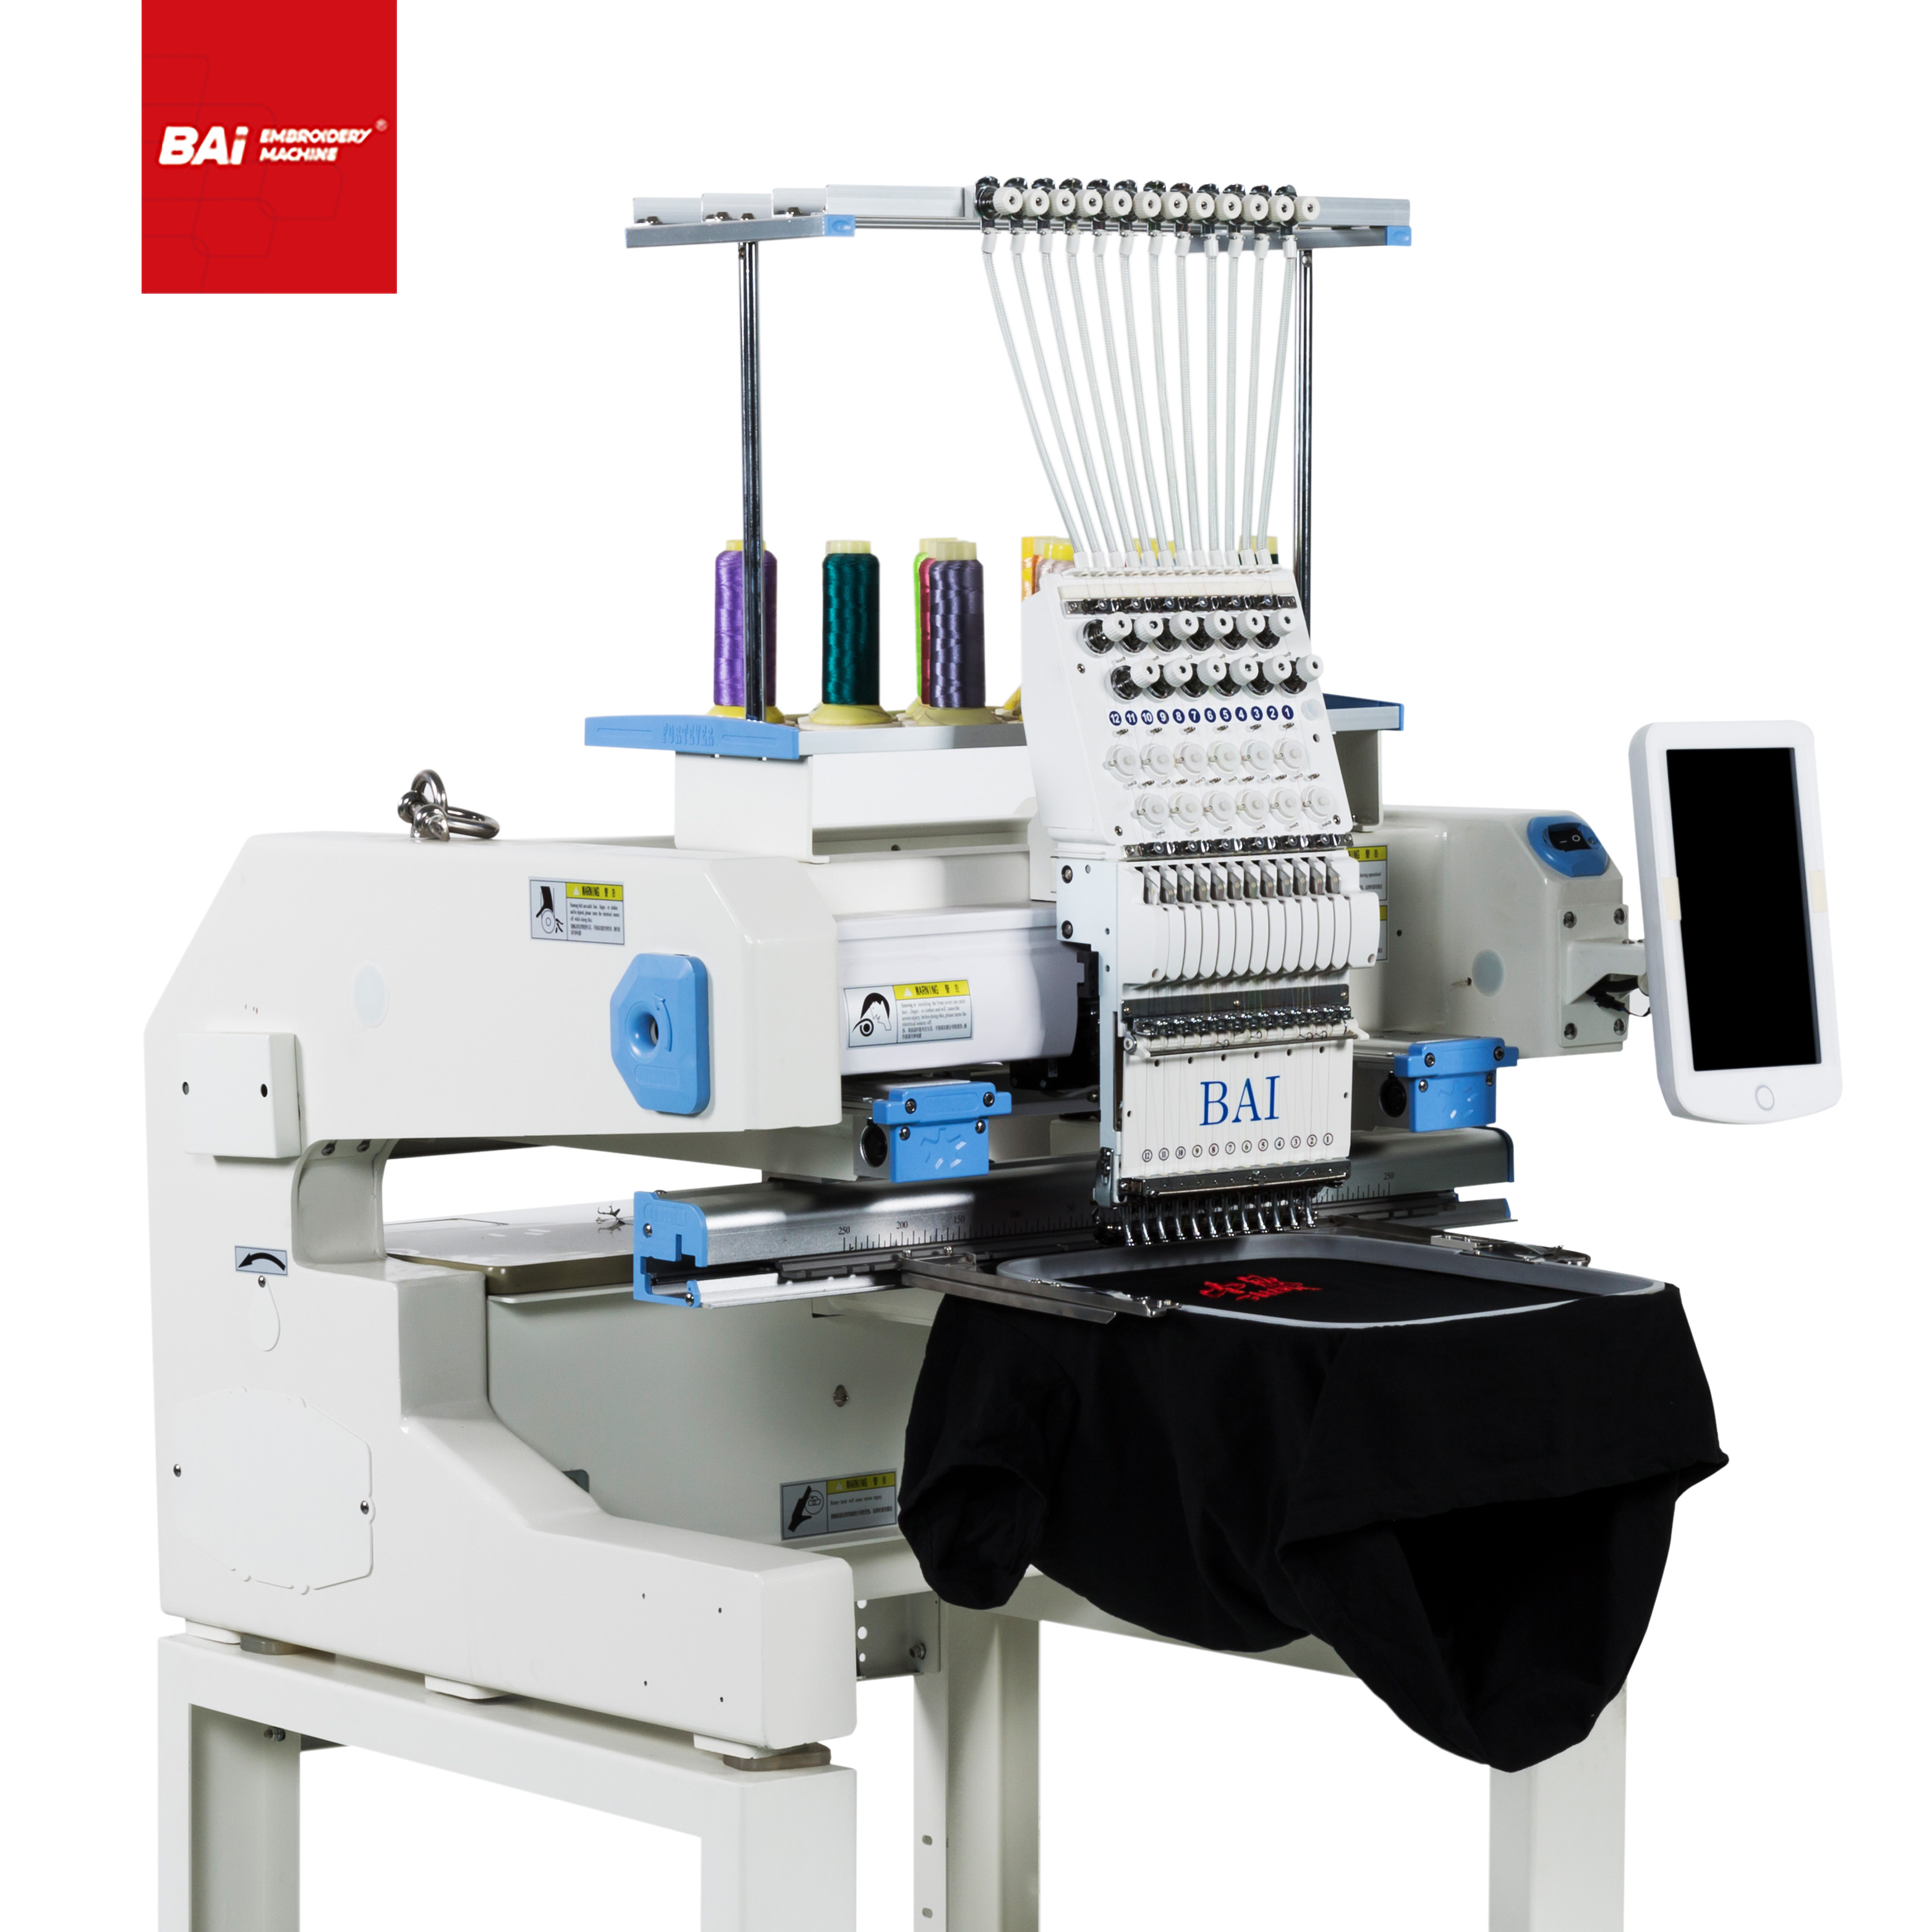 BAI Multi Function Embroidery Machine for Factory with Cap/tshirt